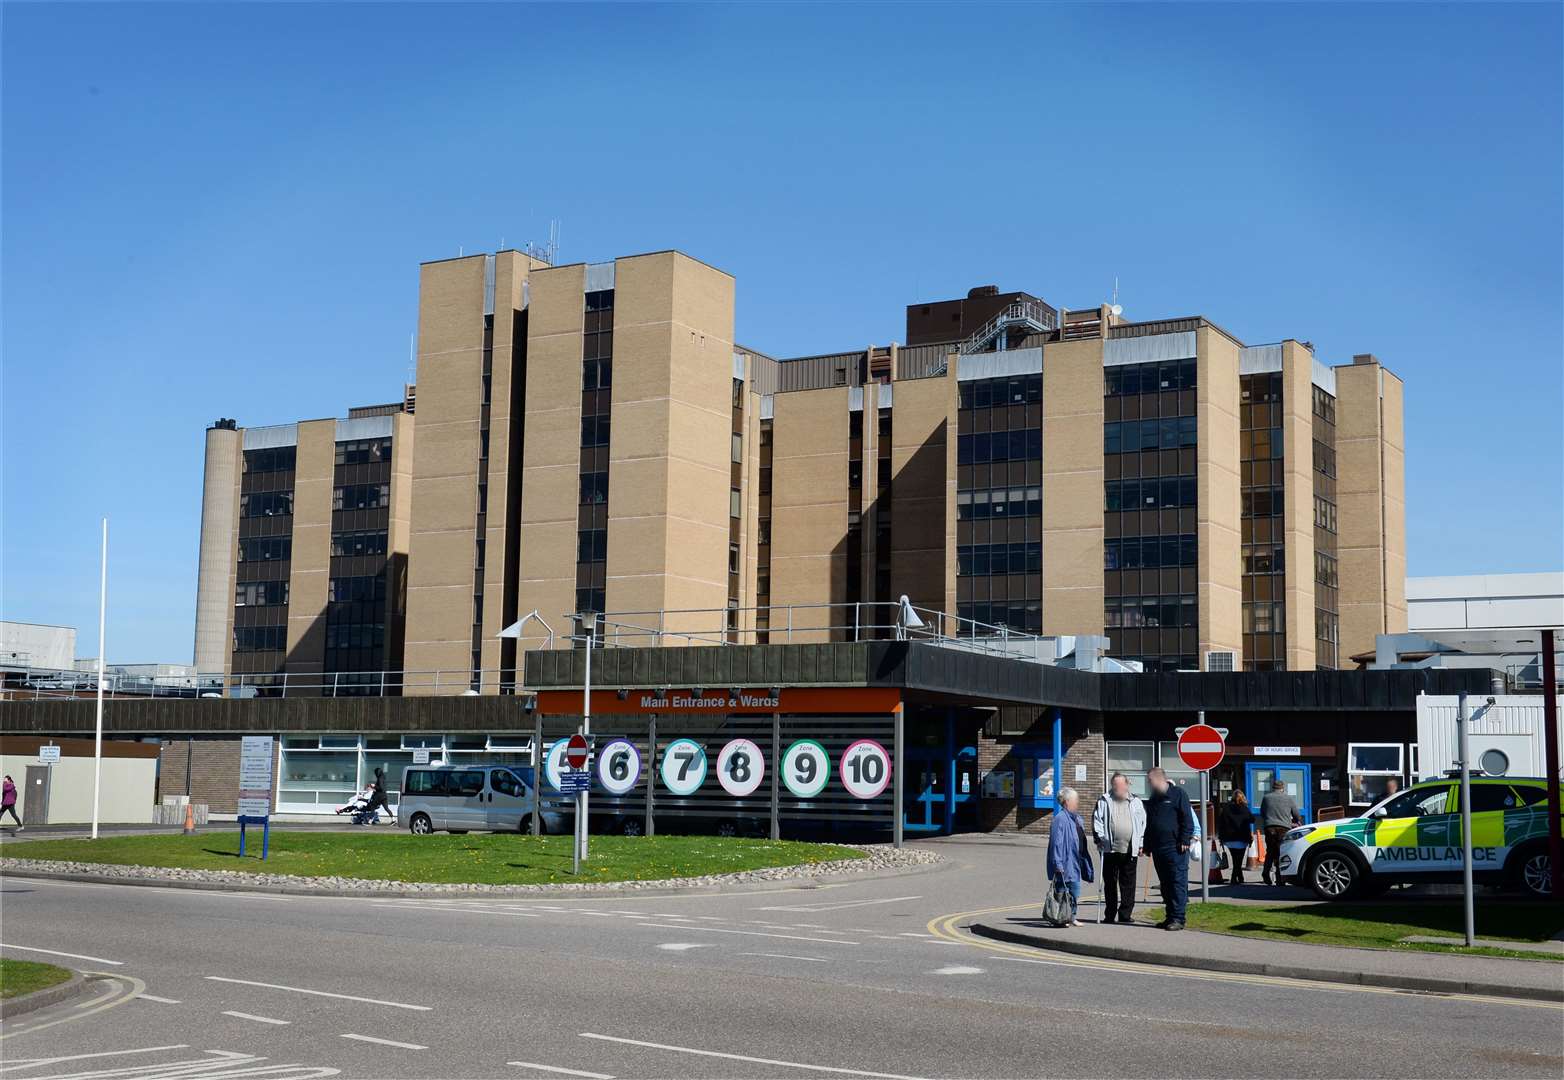 One of the wards affected by norovirus has re-opened.